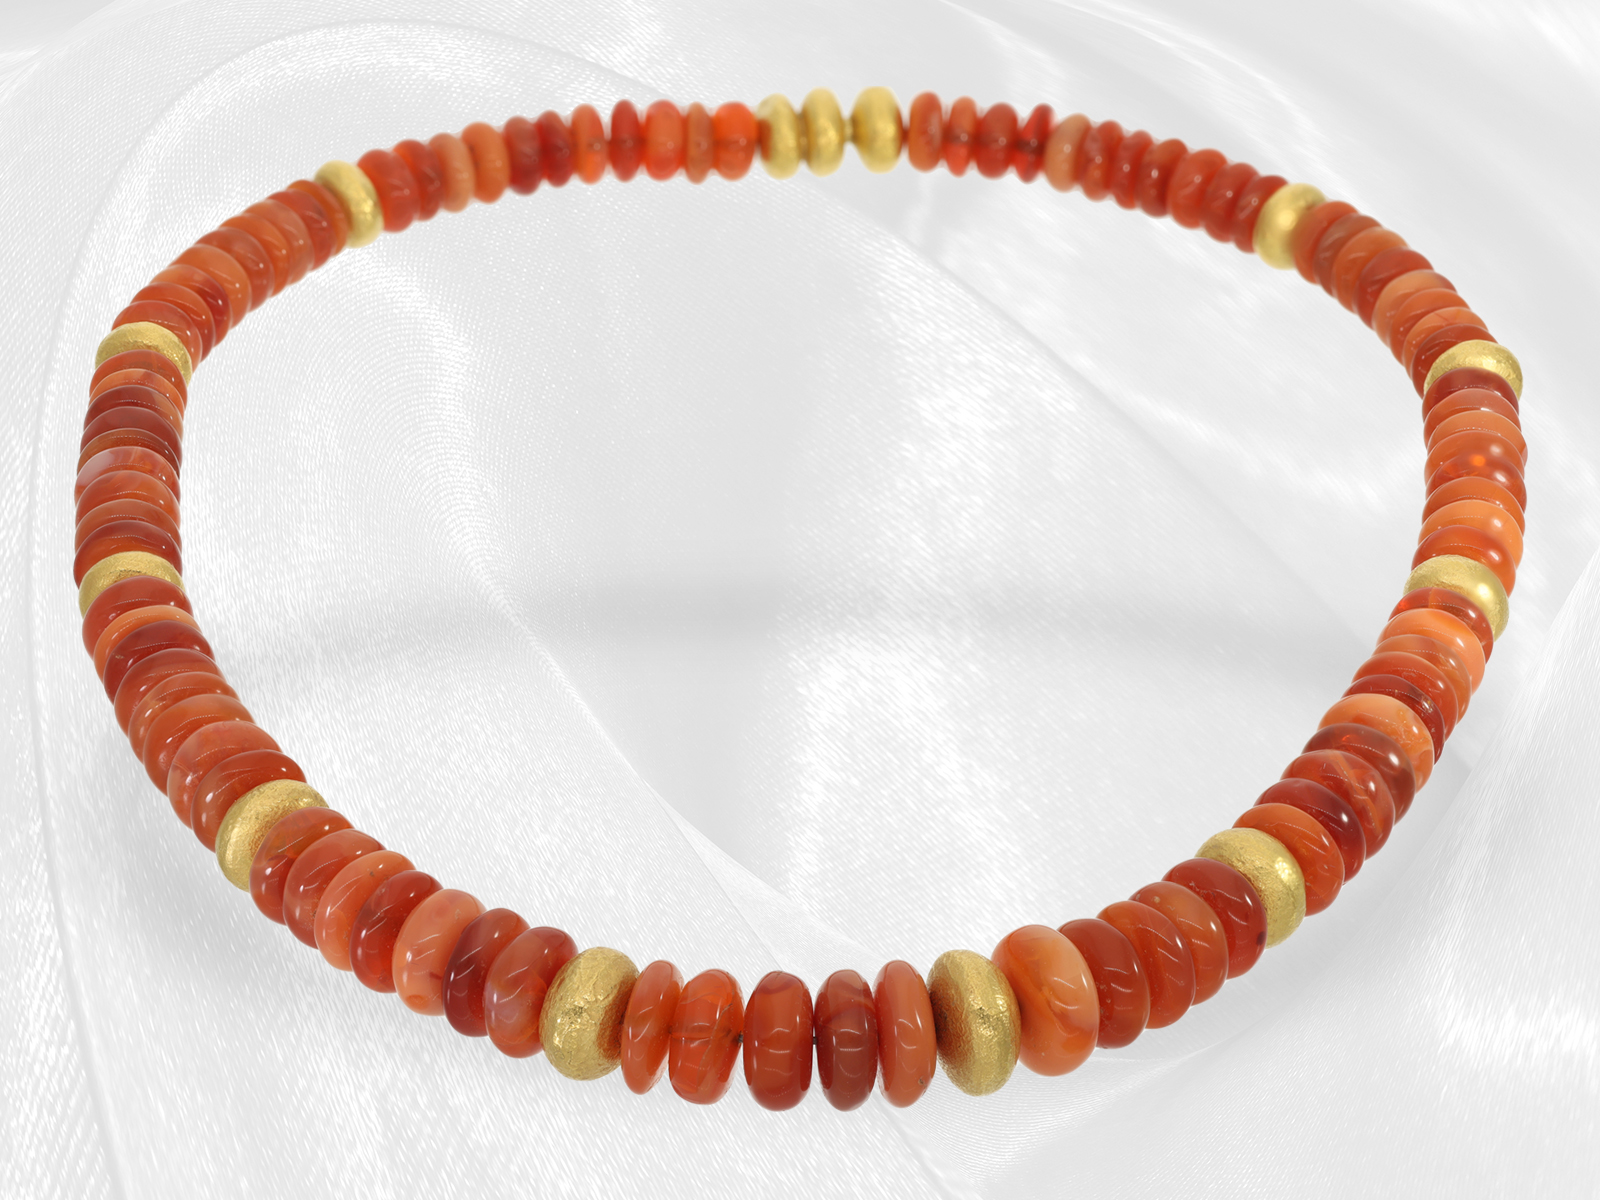 Very valuable necklace made of beautiful Mexican fire opal, like new - Image 4 of 6